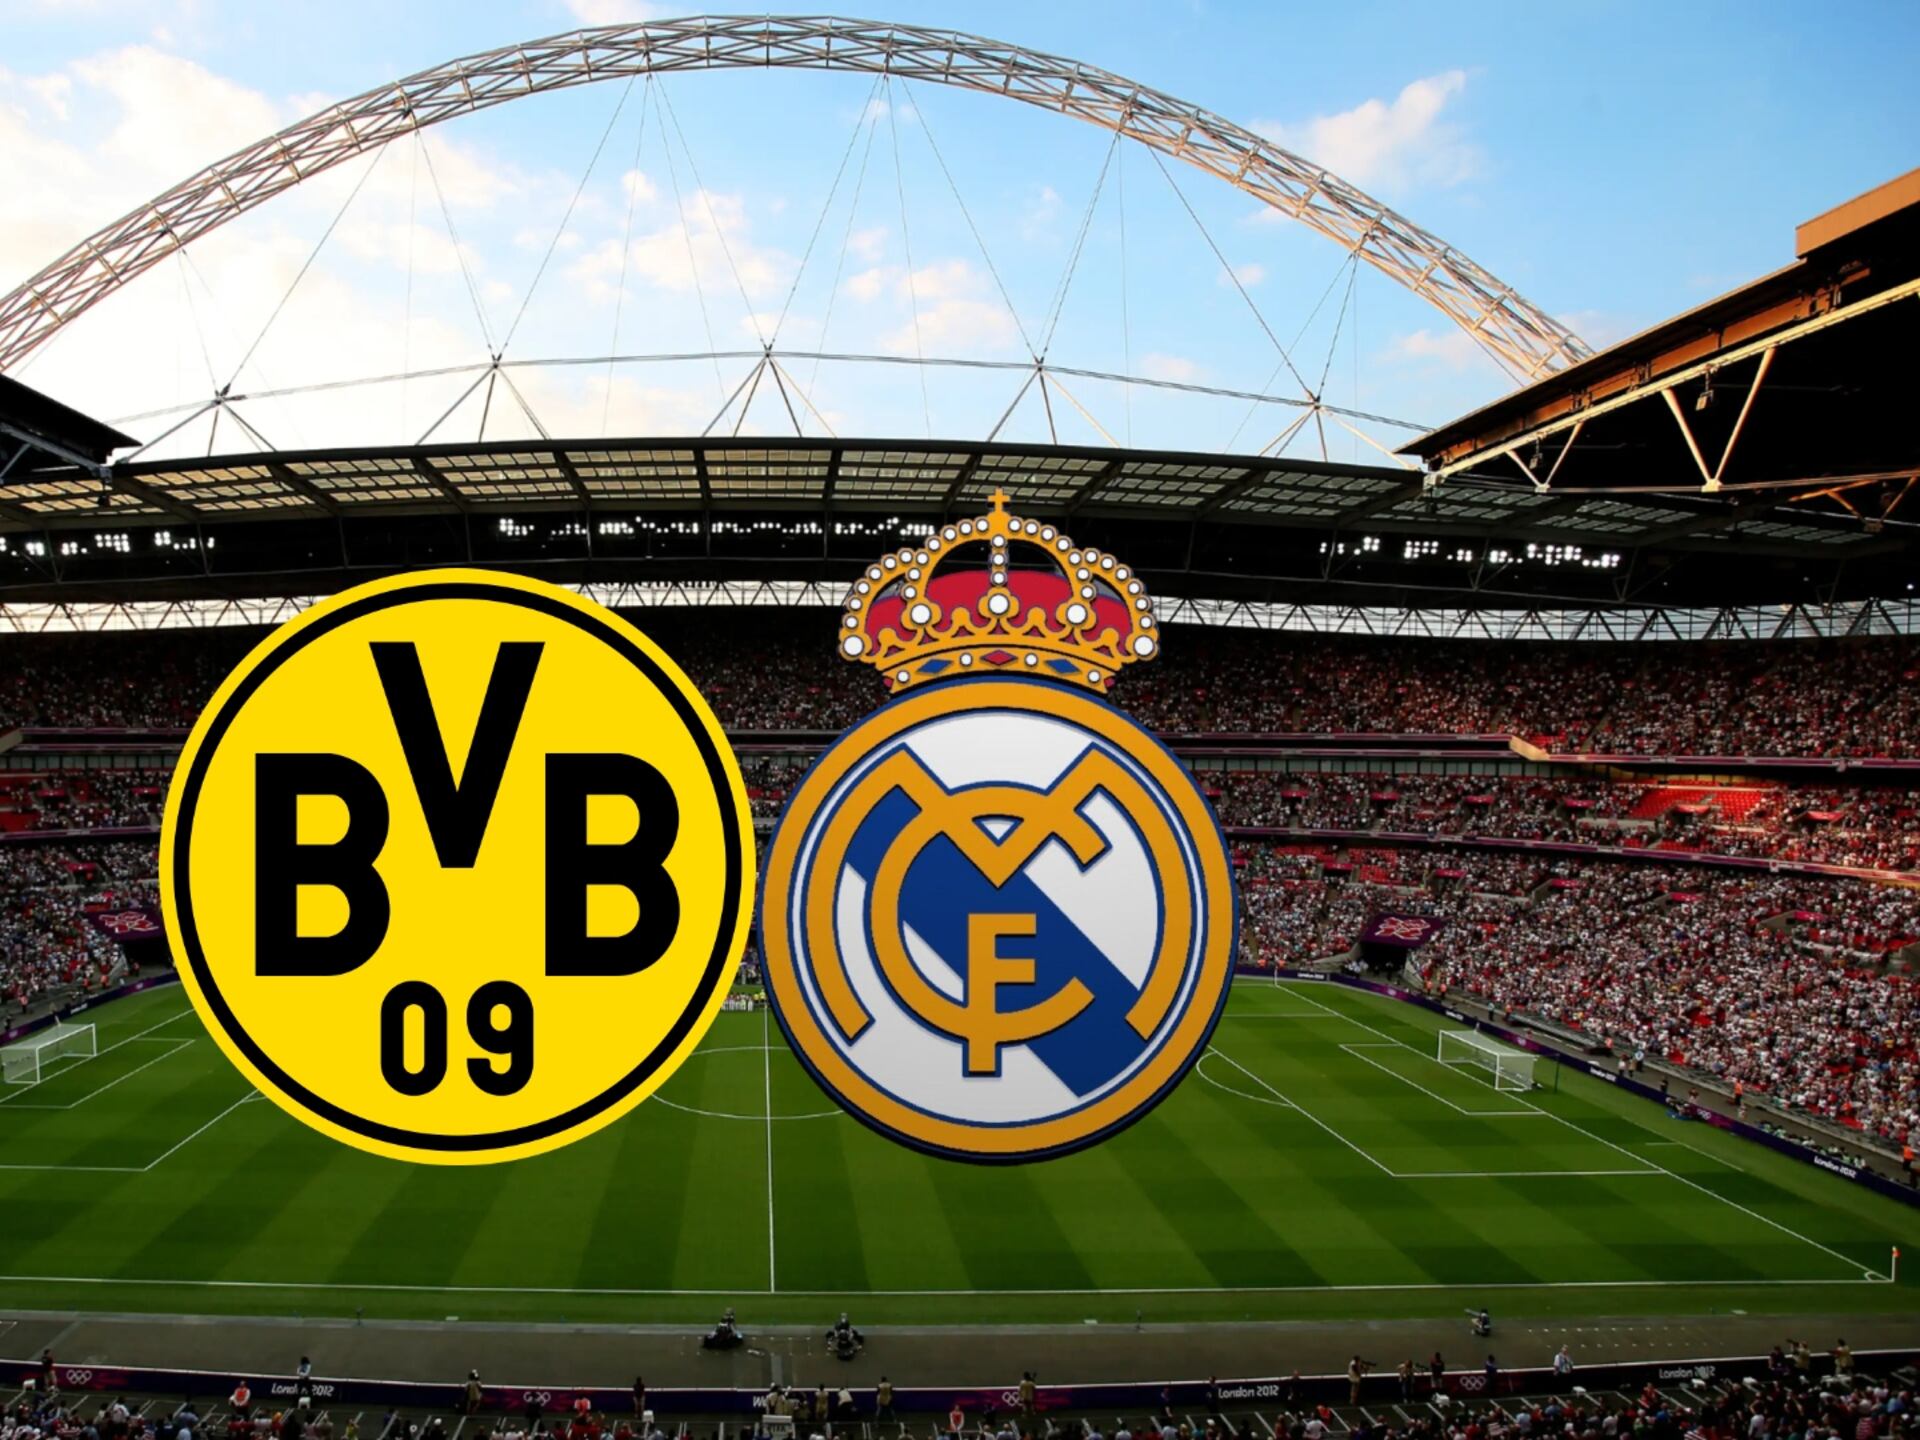 Real Madrid & Dortmund will play Champions League final, the strange reason why Dortmund will earn more if they lose  